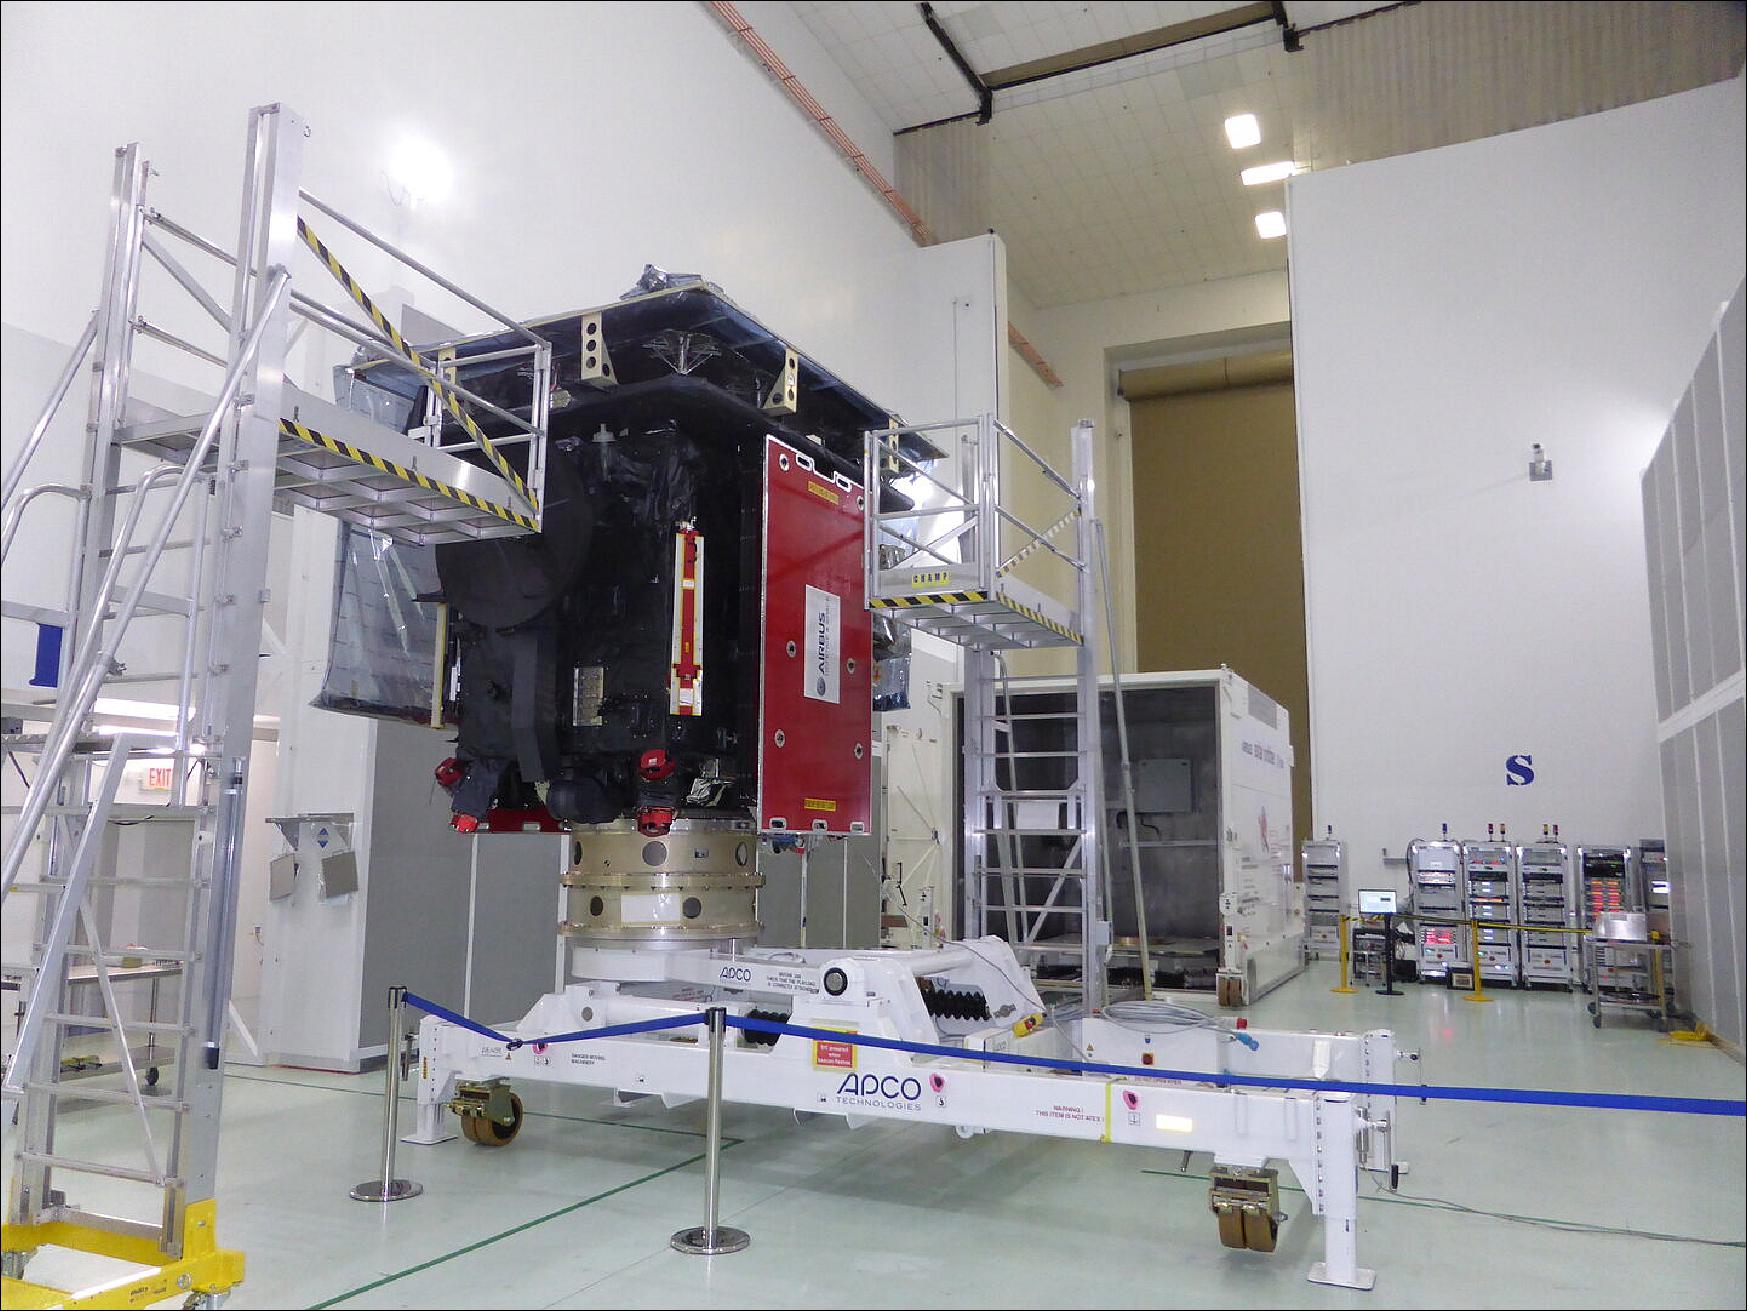 Figure 6: ESA's mission to the Sun has been unpacked following its arrival in Florida earlier this month, ready to begin pre-launch testing and checks (image credit: Airbus DS Ltd)